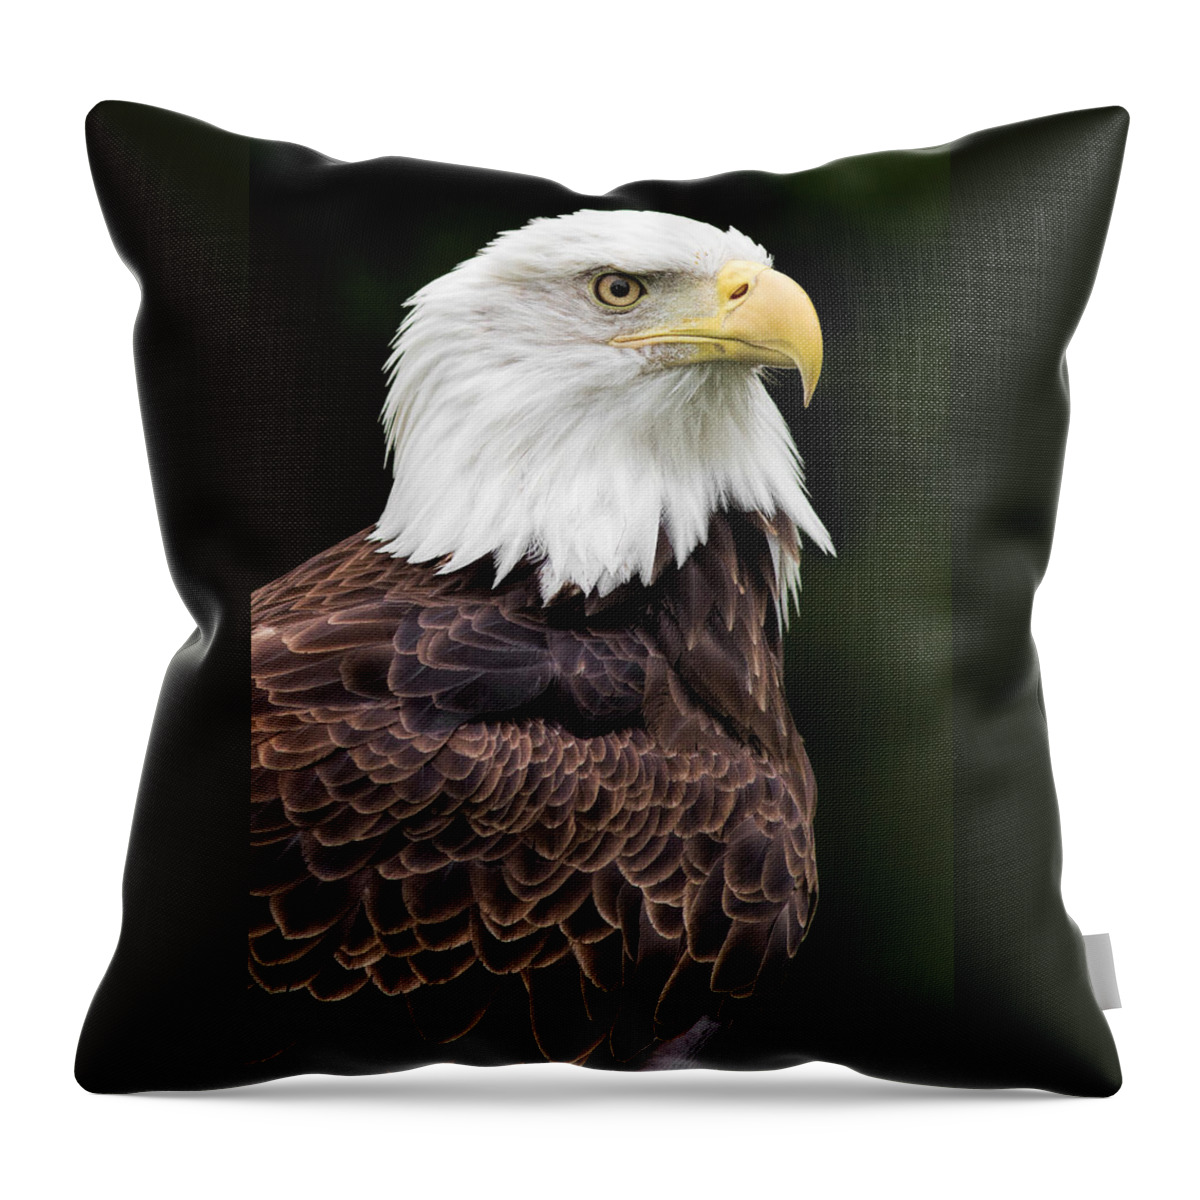 Bald Eagle Throw Pillow featuring the photograph With Dignity by Dale Kincaid